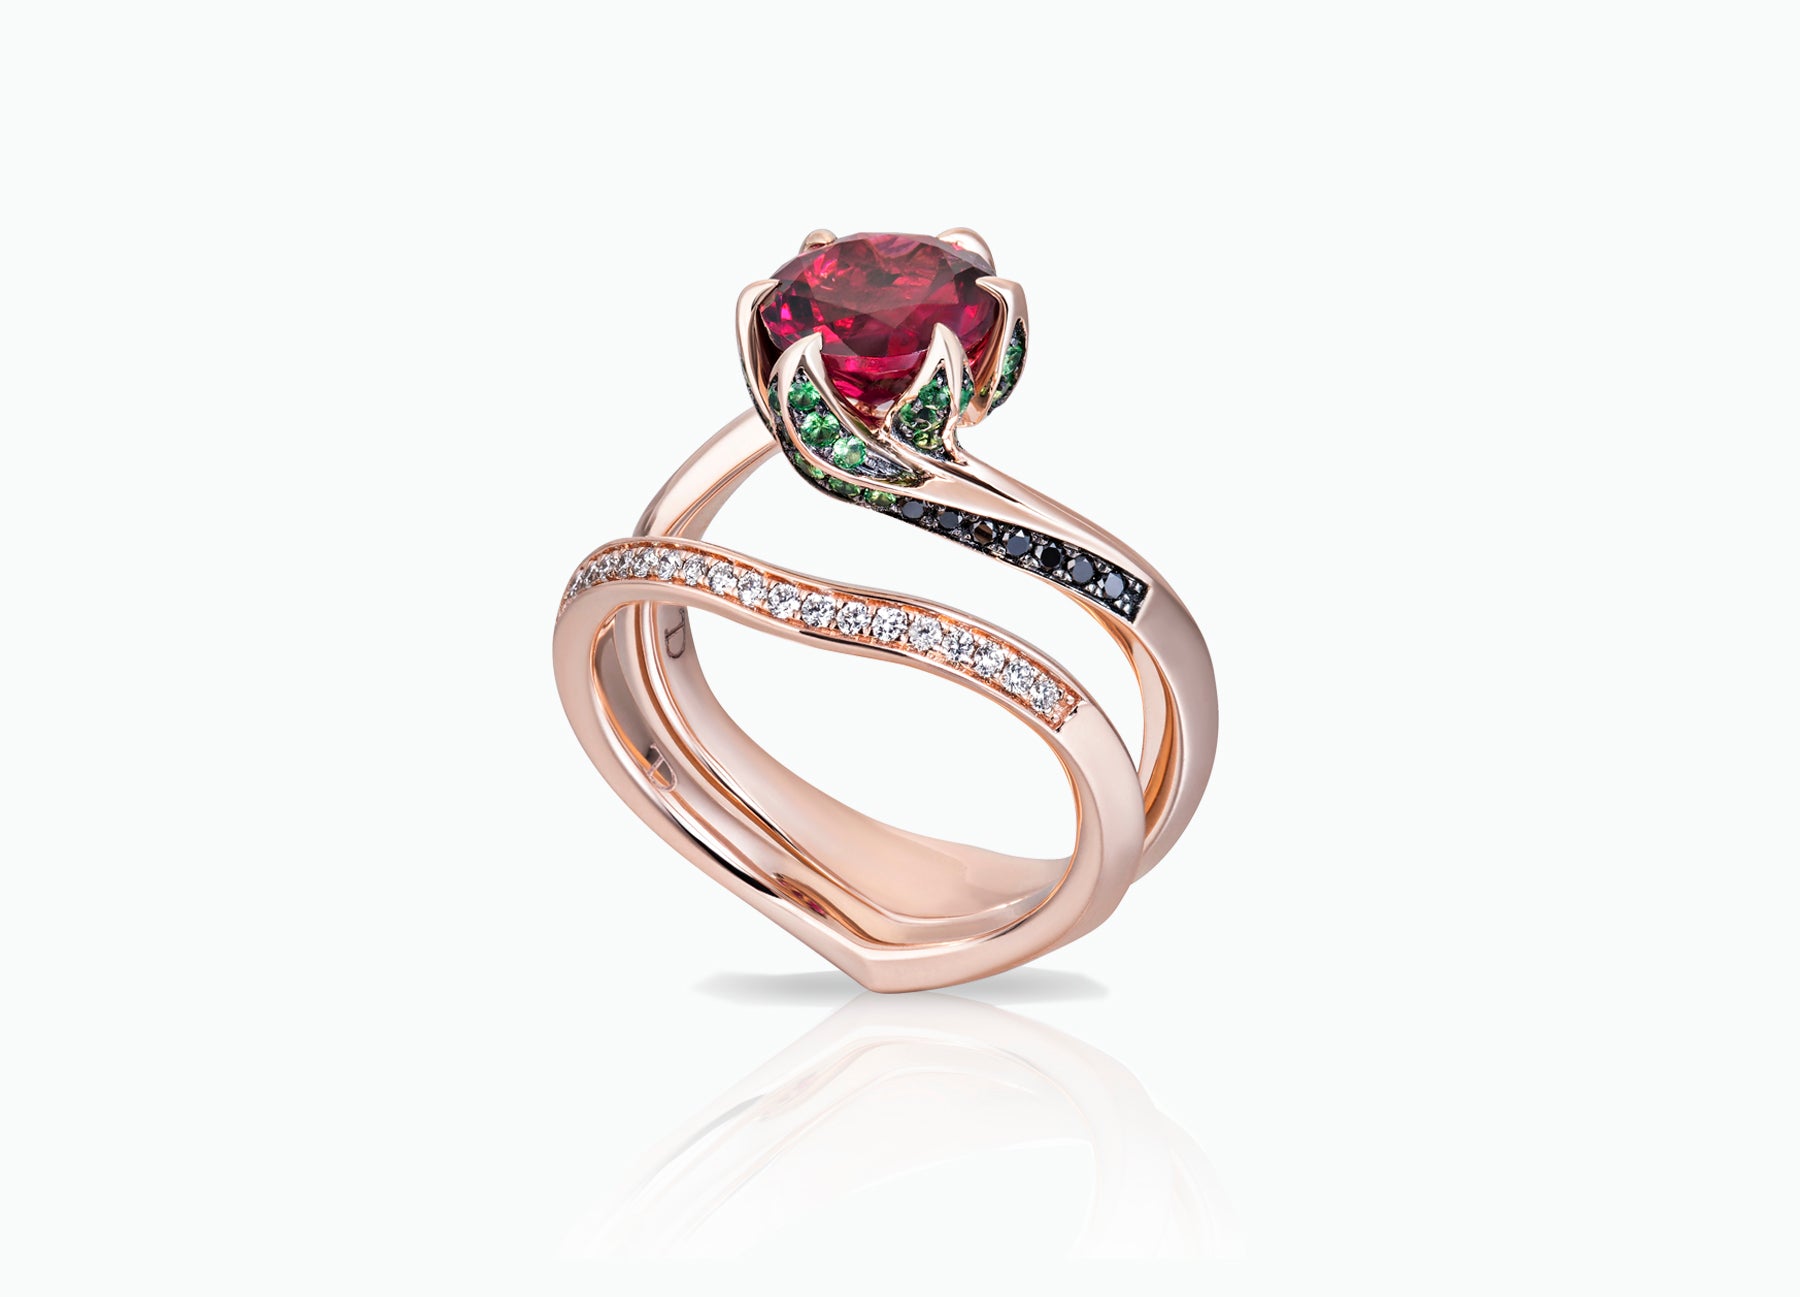 Lily Pad Bridal Set Rings in 18K Rose Gold Inspired By Beauty And The Beast Enchanted Rose - Side View